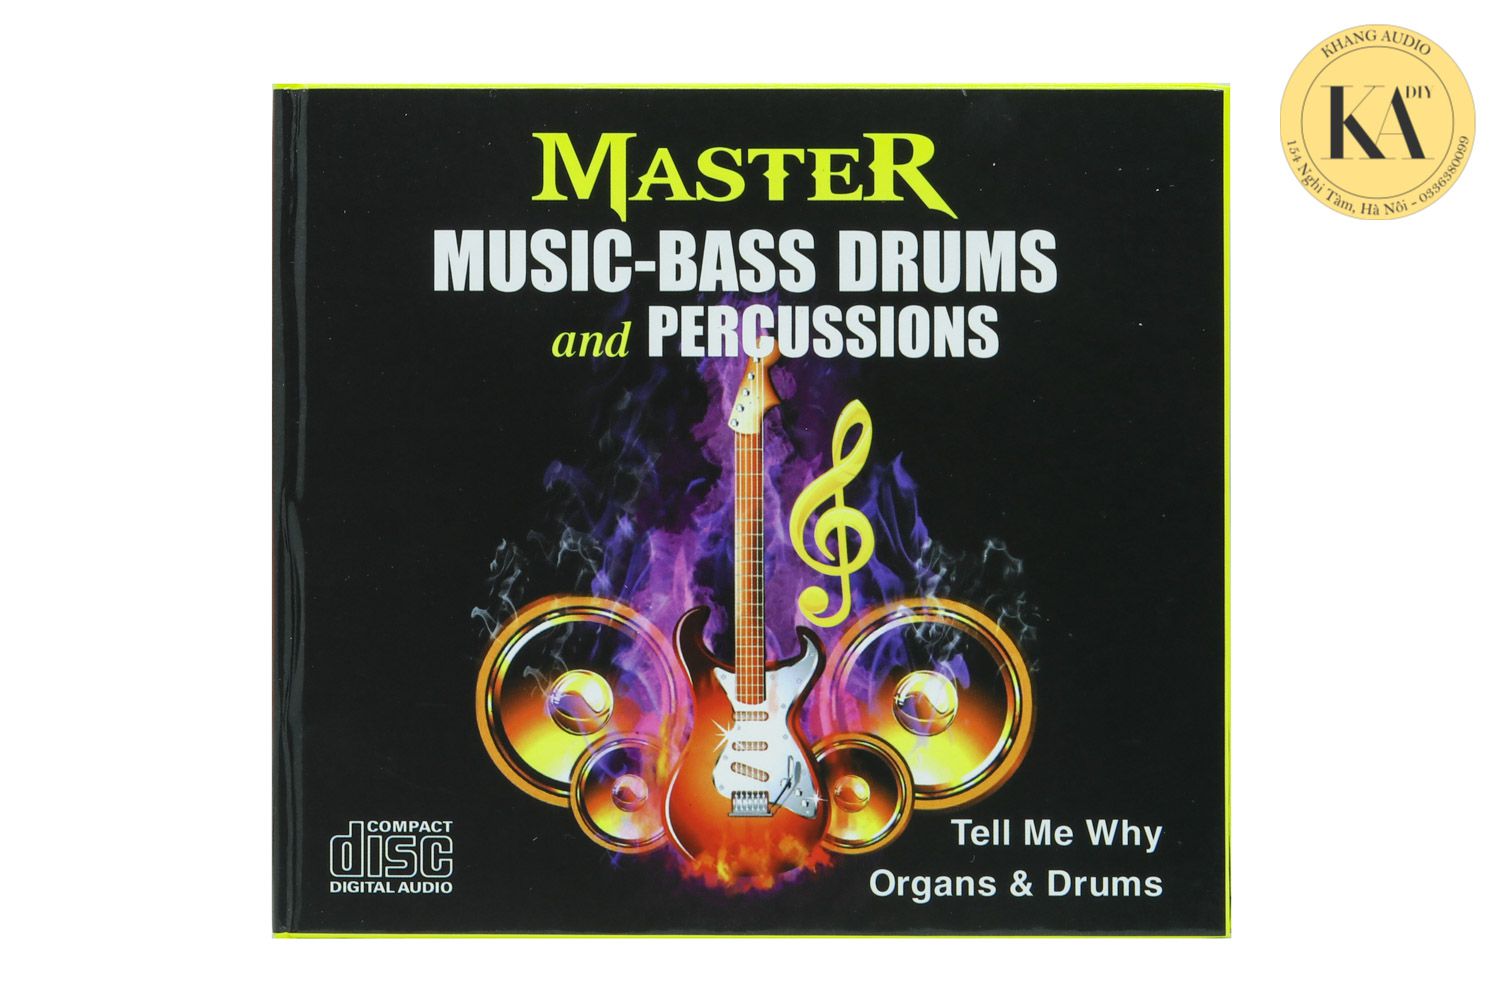 Master Music-Bass Drums And Percussions